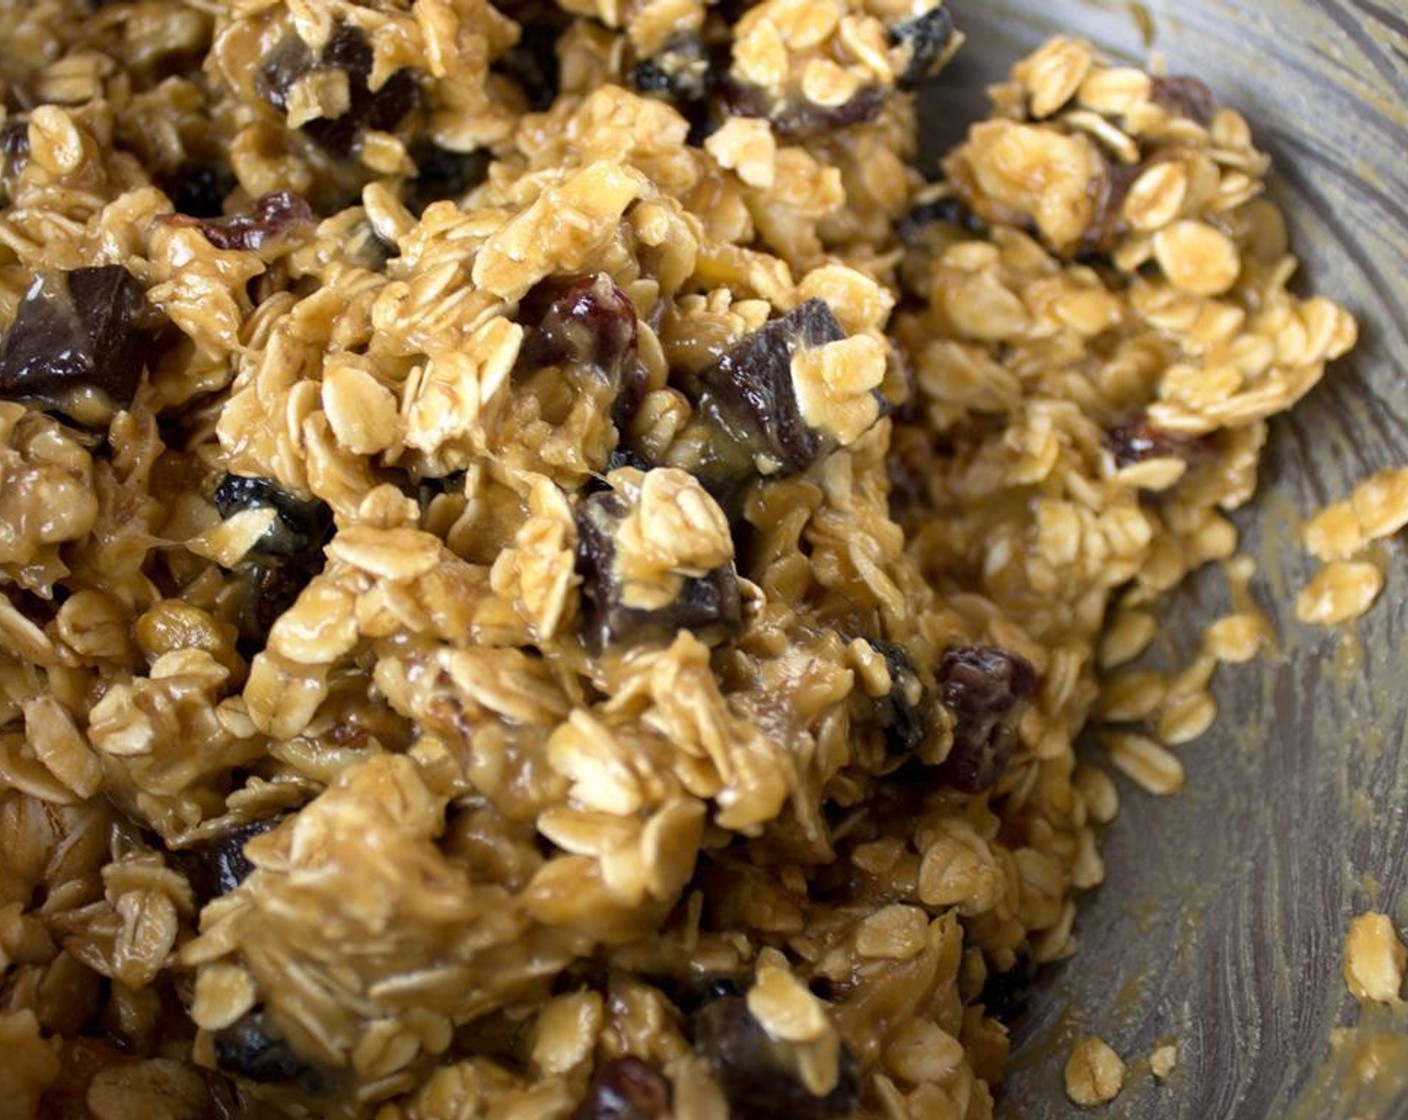 step 4 In a separate bowl, mix together the Dried Blueberries (1/4 cup), Dried Cherry (1/4 cup), Dark Chocolate Chunks (1/4 cup), Walnut (1/2 cup), Oatmeal (1 1/2 cups) and All-Purpose Flour (1/3 cup). Then mix the dry and wet ingredients together.